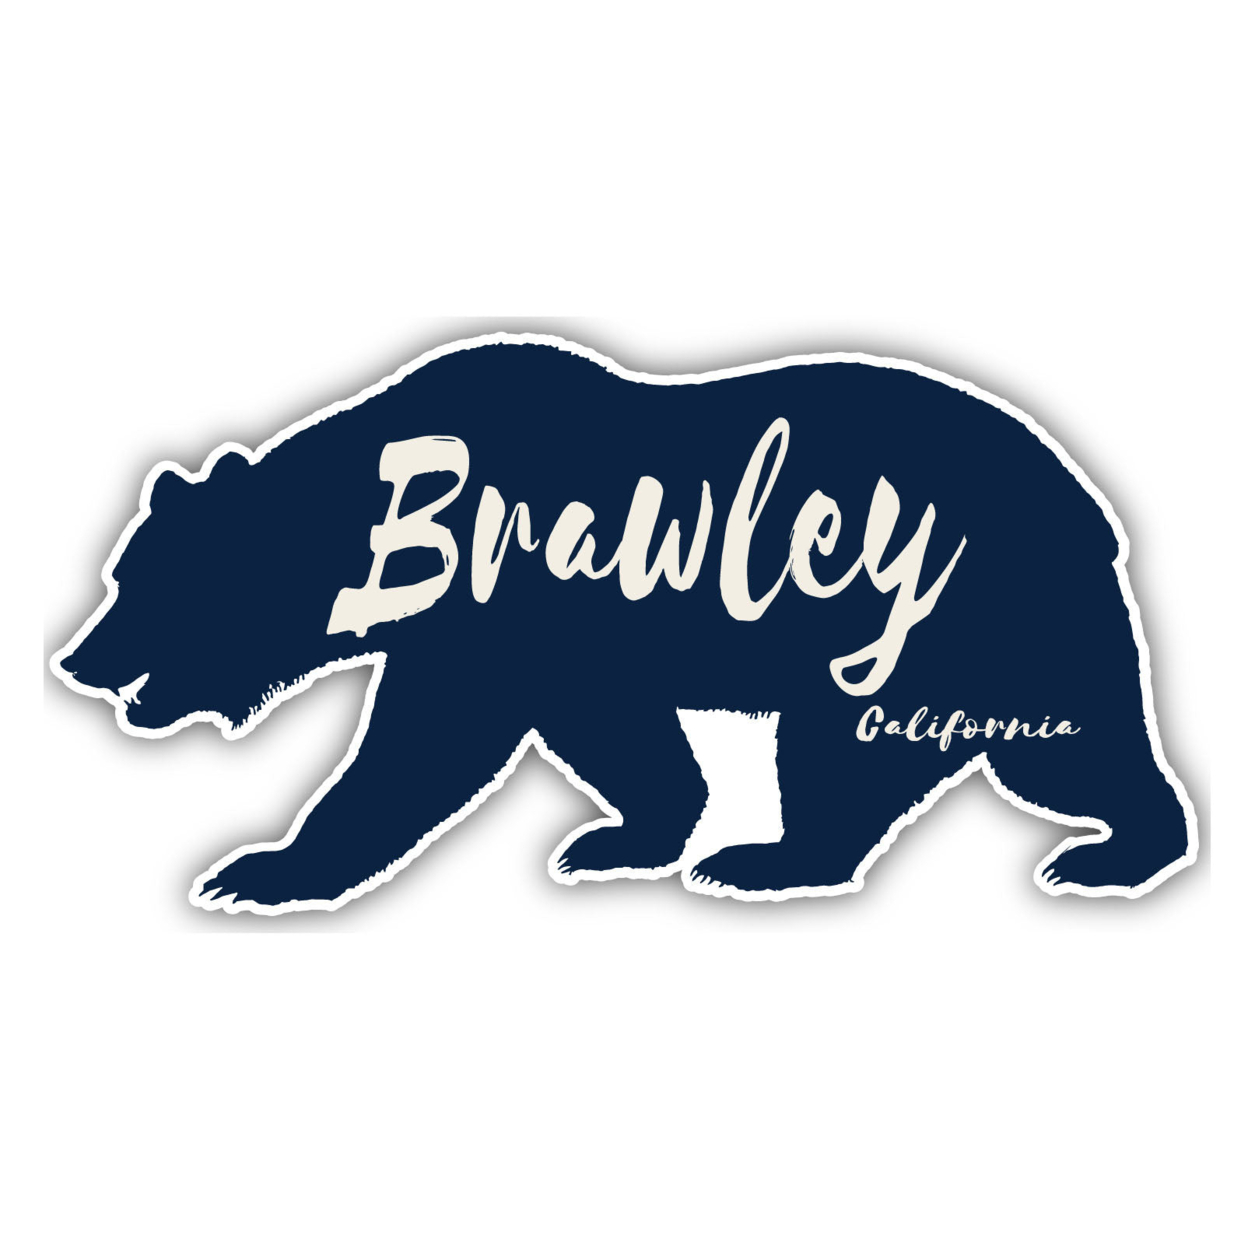 Brawley California Souvenir Decorative Stickers (Choose Theme And Size) - 4-Pack, 6-Inch, Bear